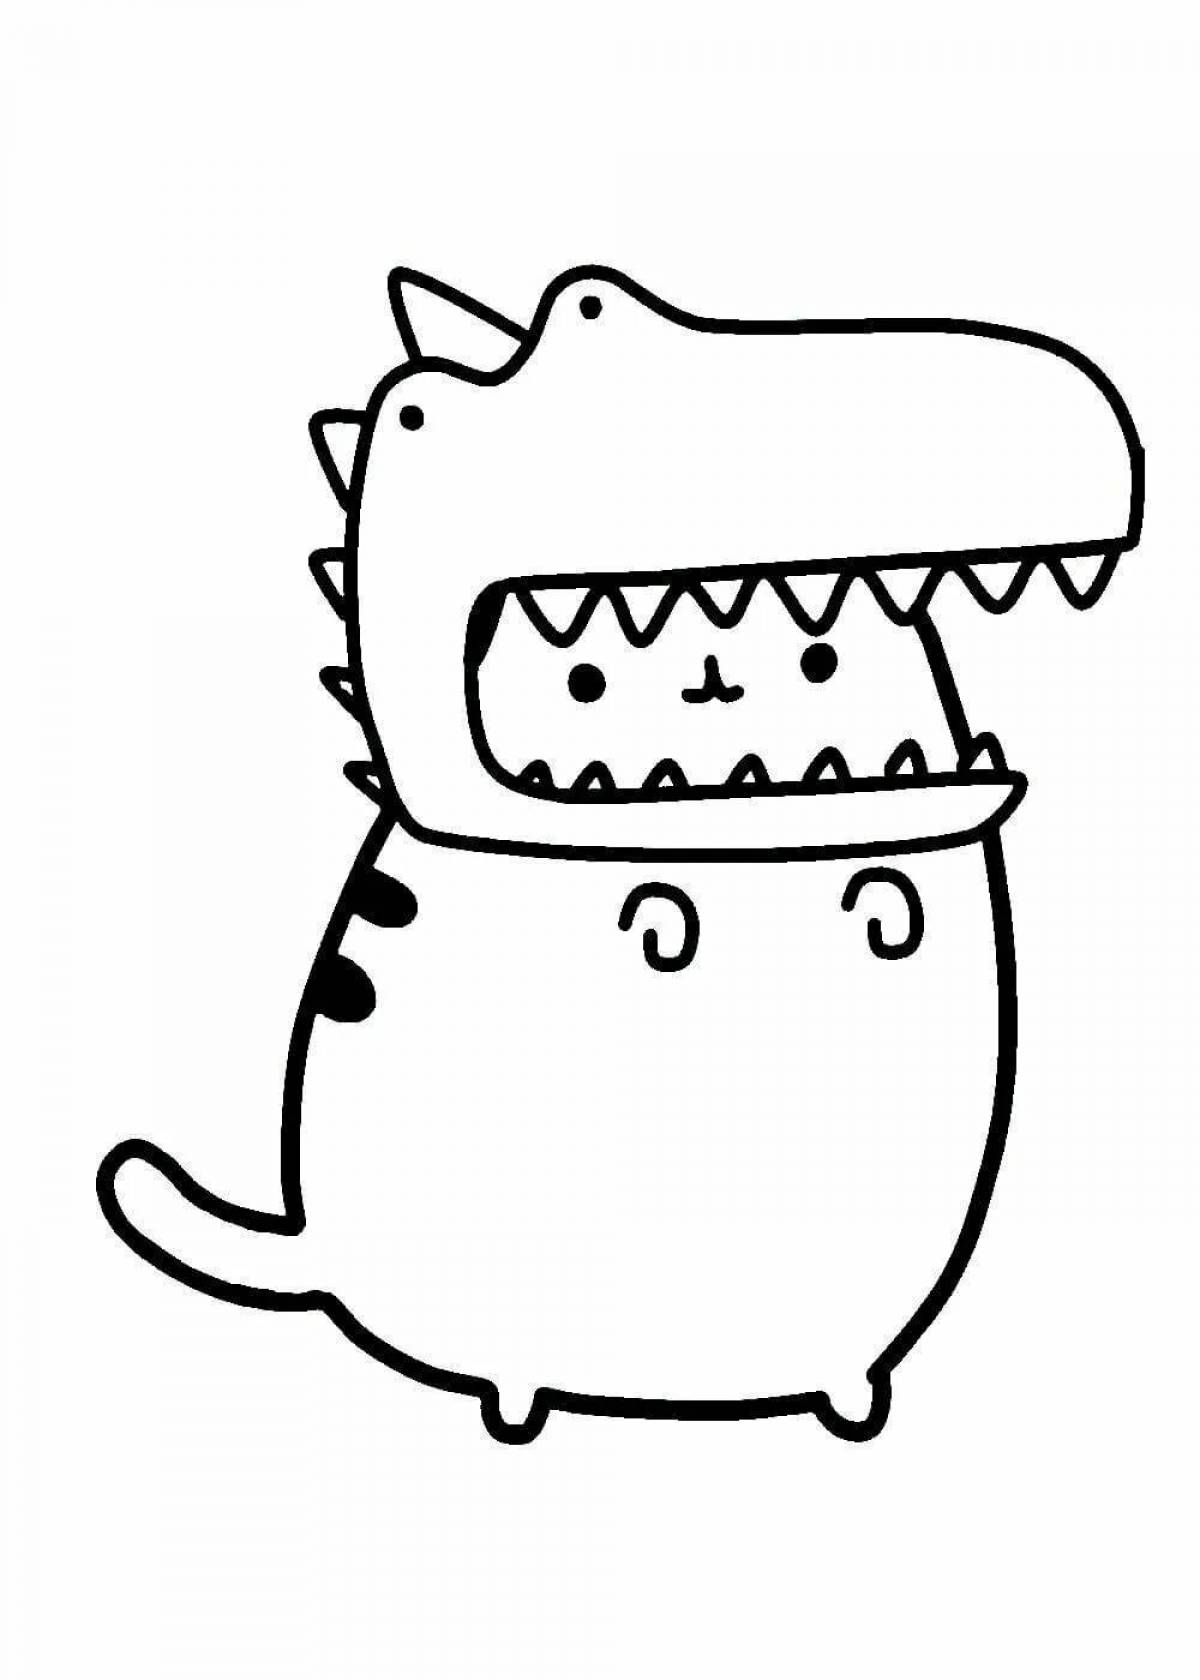 Coloring radiant pusheen stickers